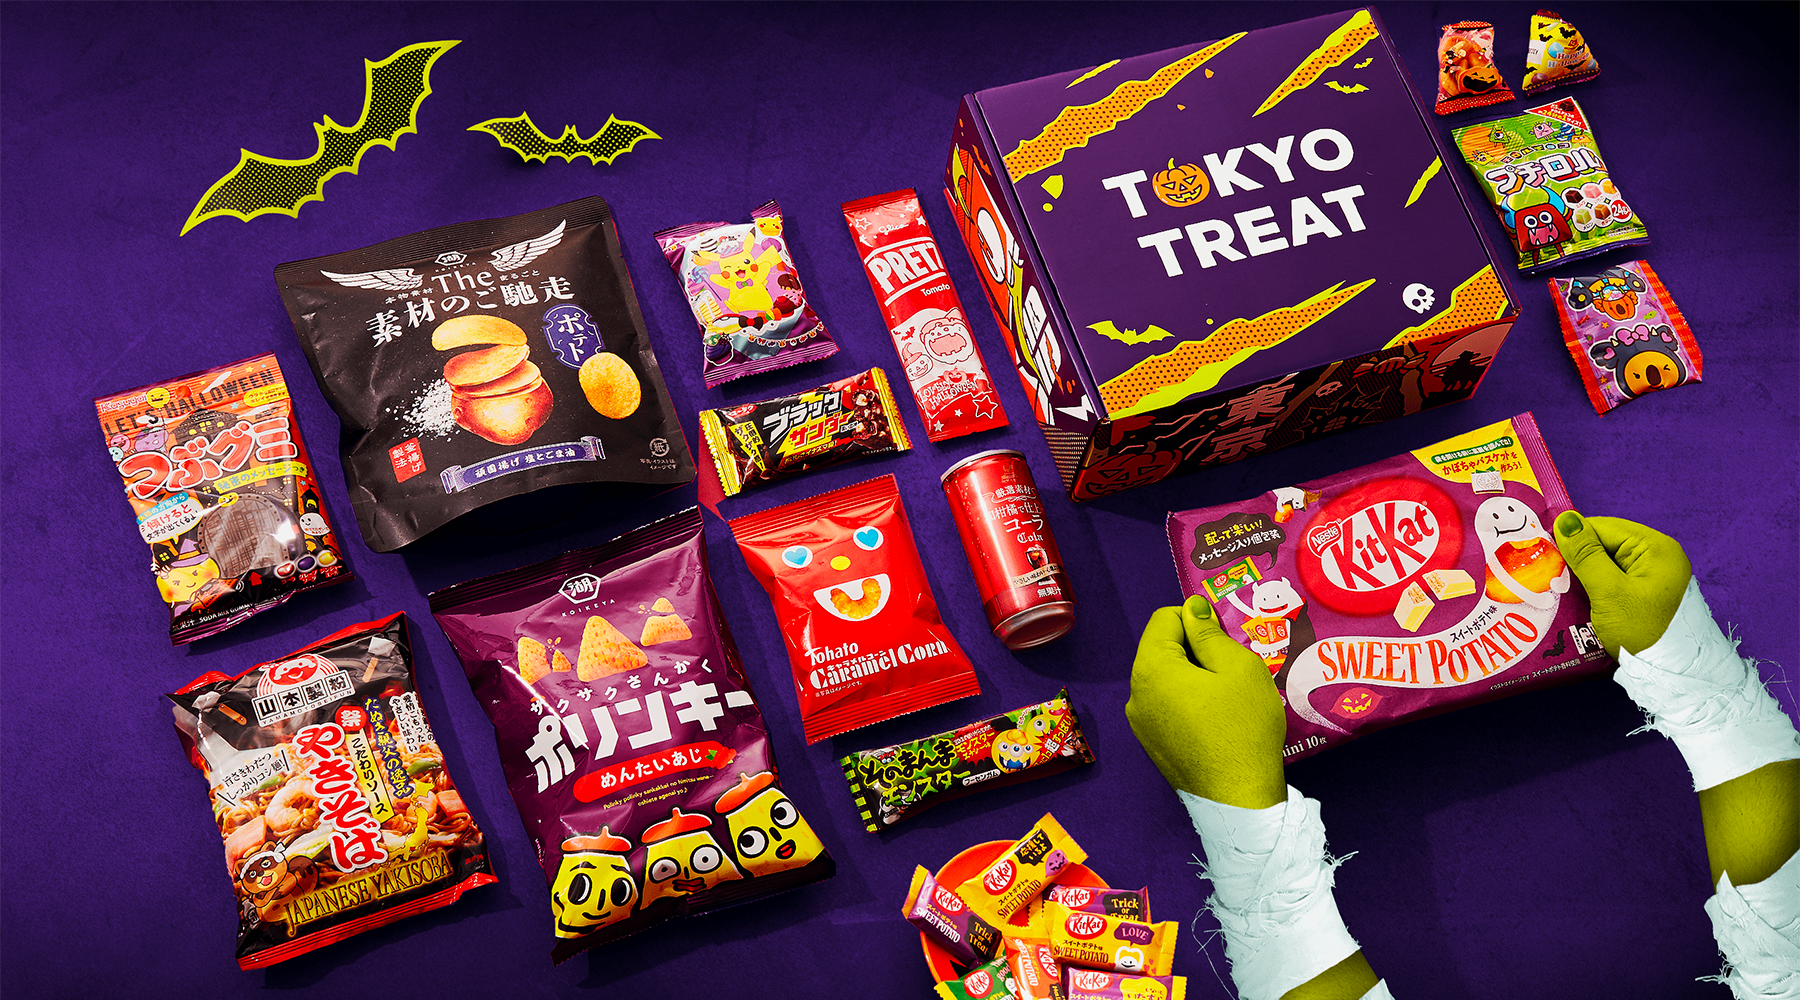 TokyoTreat's Curated Halloween Snack Box Is Amazing